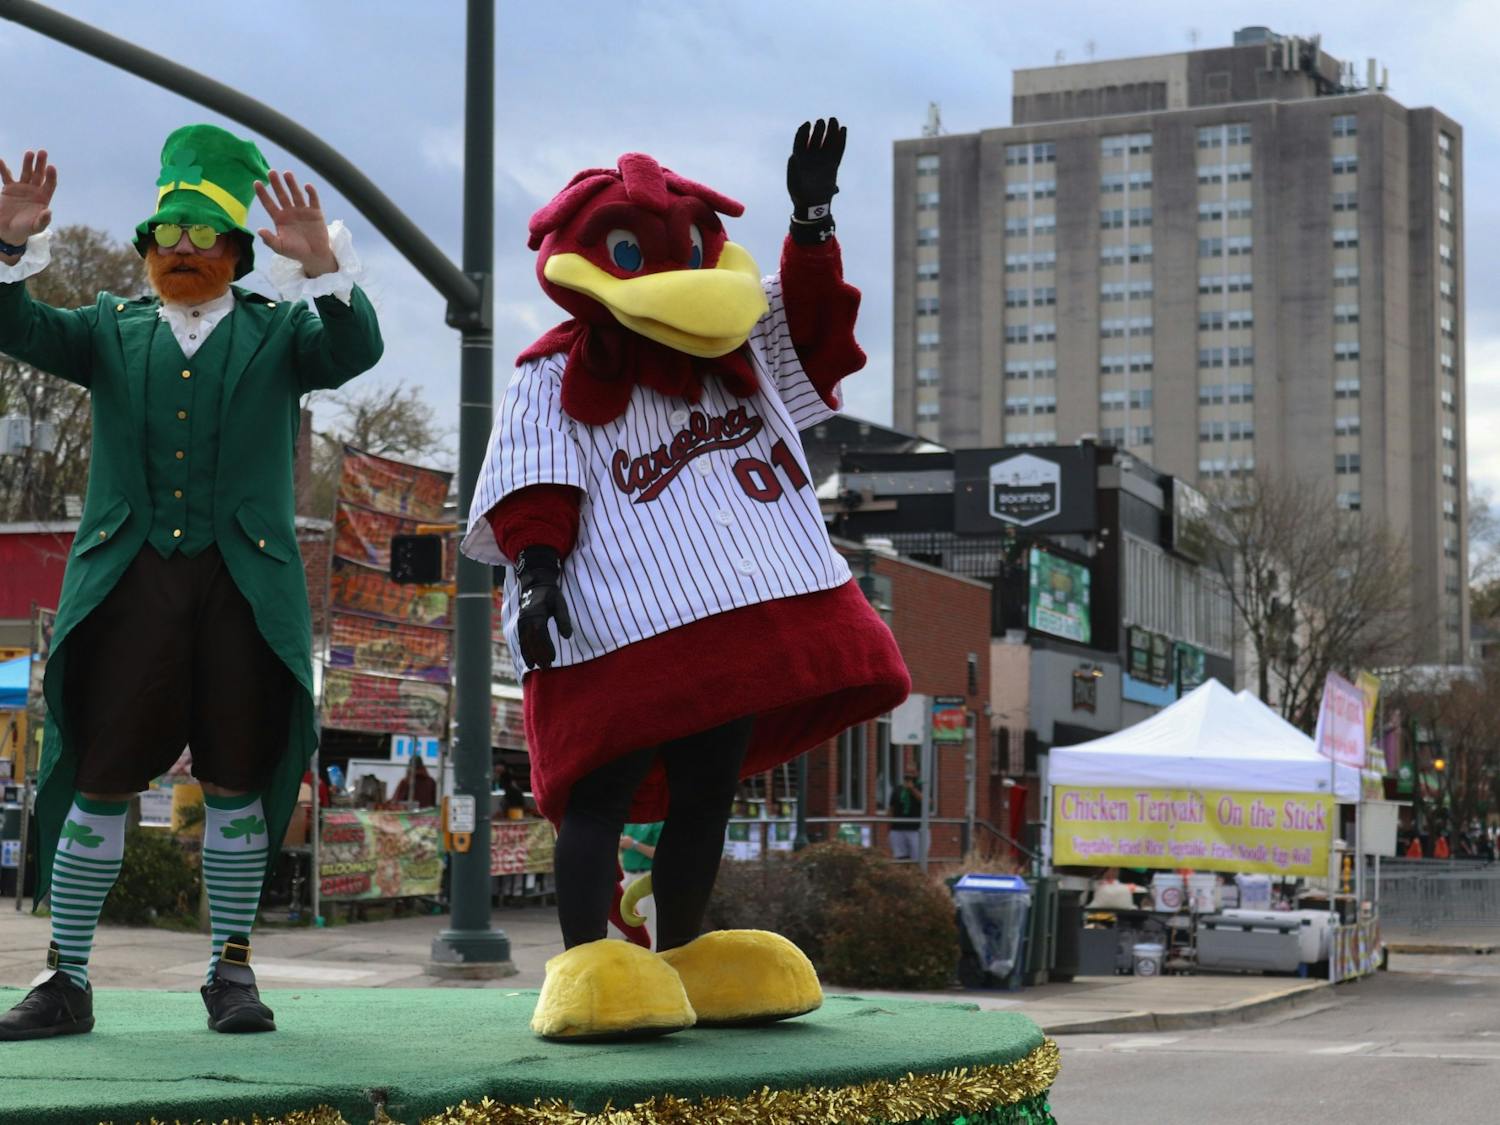 Cocky and a man dressed as a leprechaun wave to the crowd from the grand marshal float in the 40th Annual St. Pats in 5 Points Parade on March 19, 2022